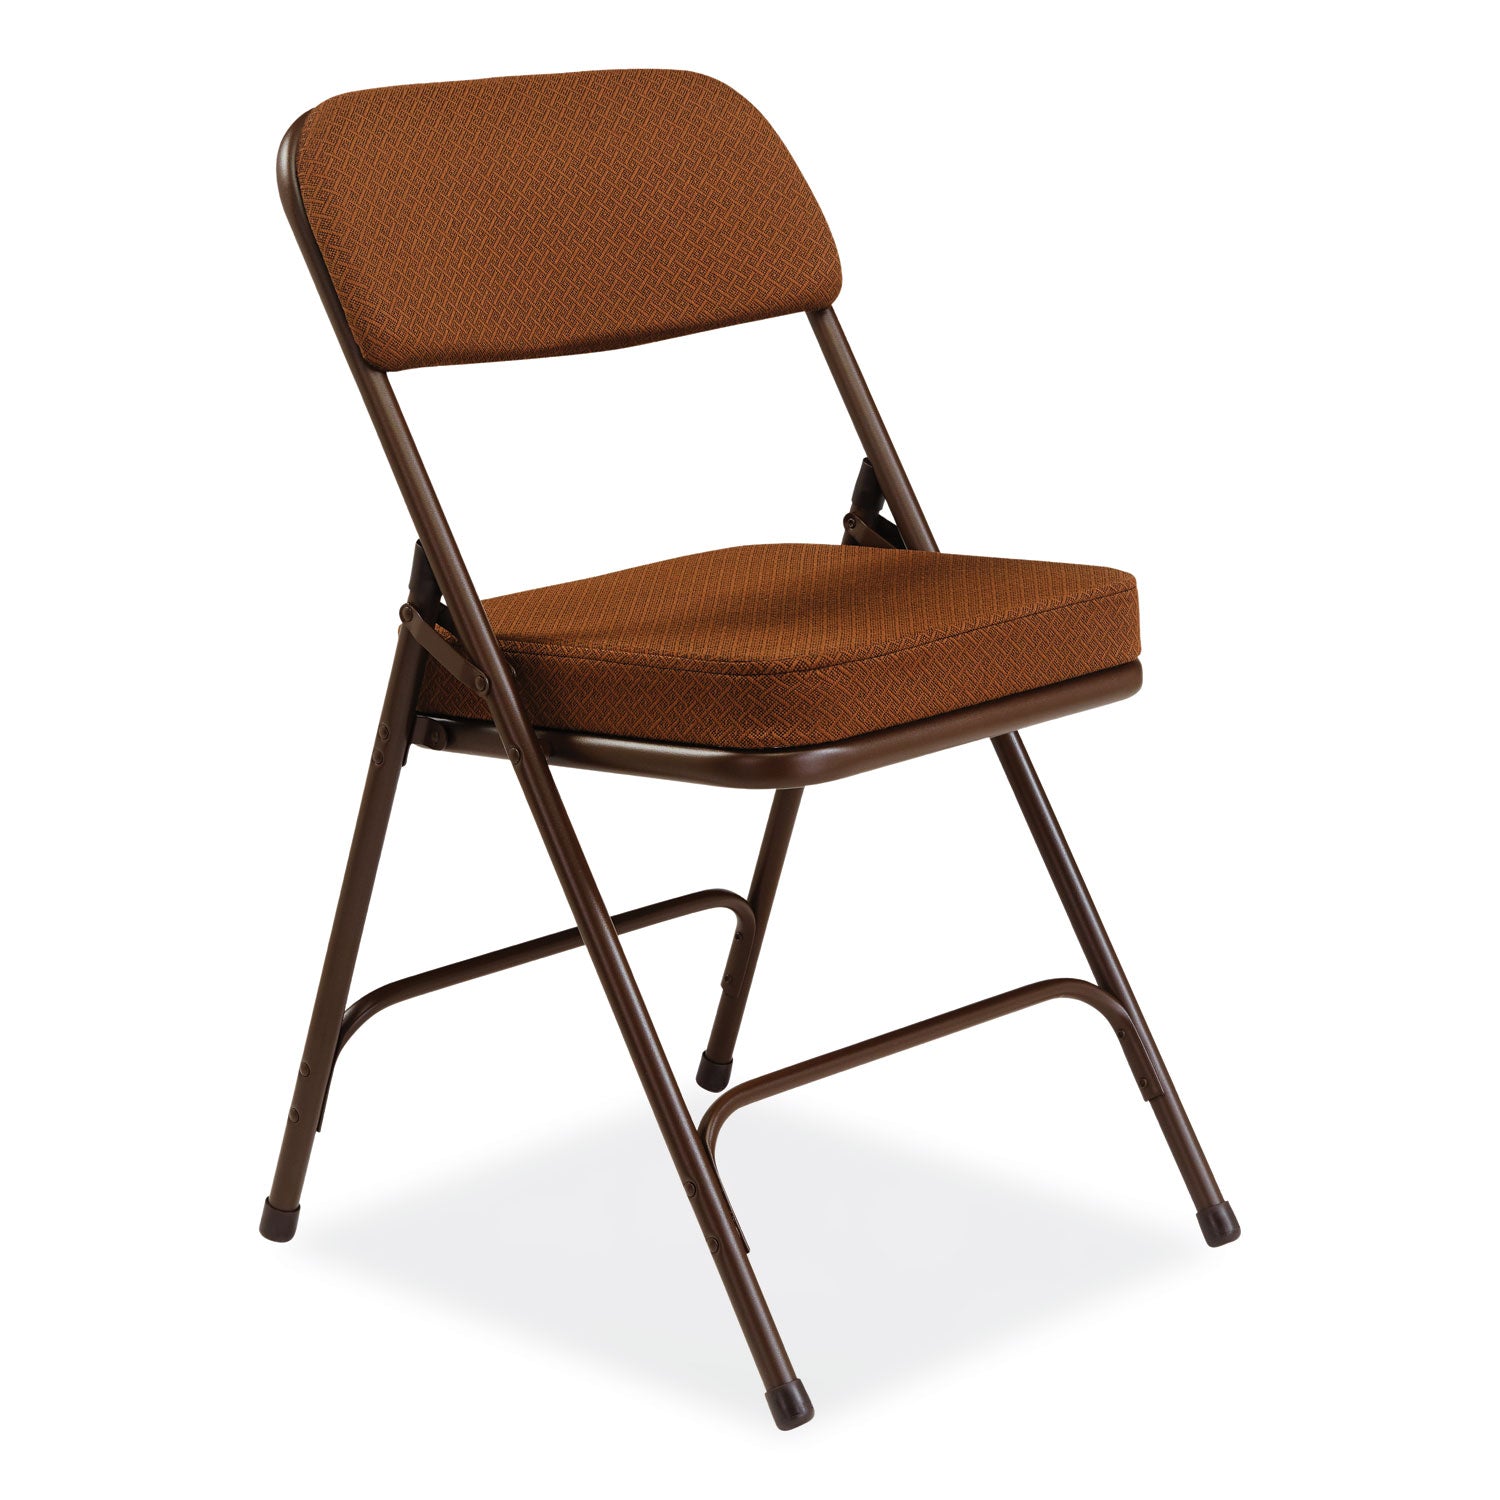 3200-series-premium-fabric-dual-hinge-folding-chair-supports-300-lb-gold-seat-back-brown-base-2-ct-ships-in-1-3-bus-days_nps3219 - 2